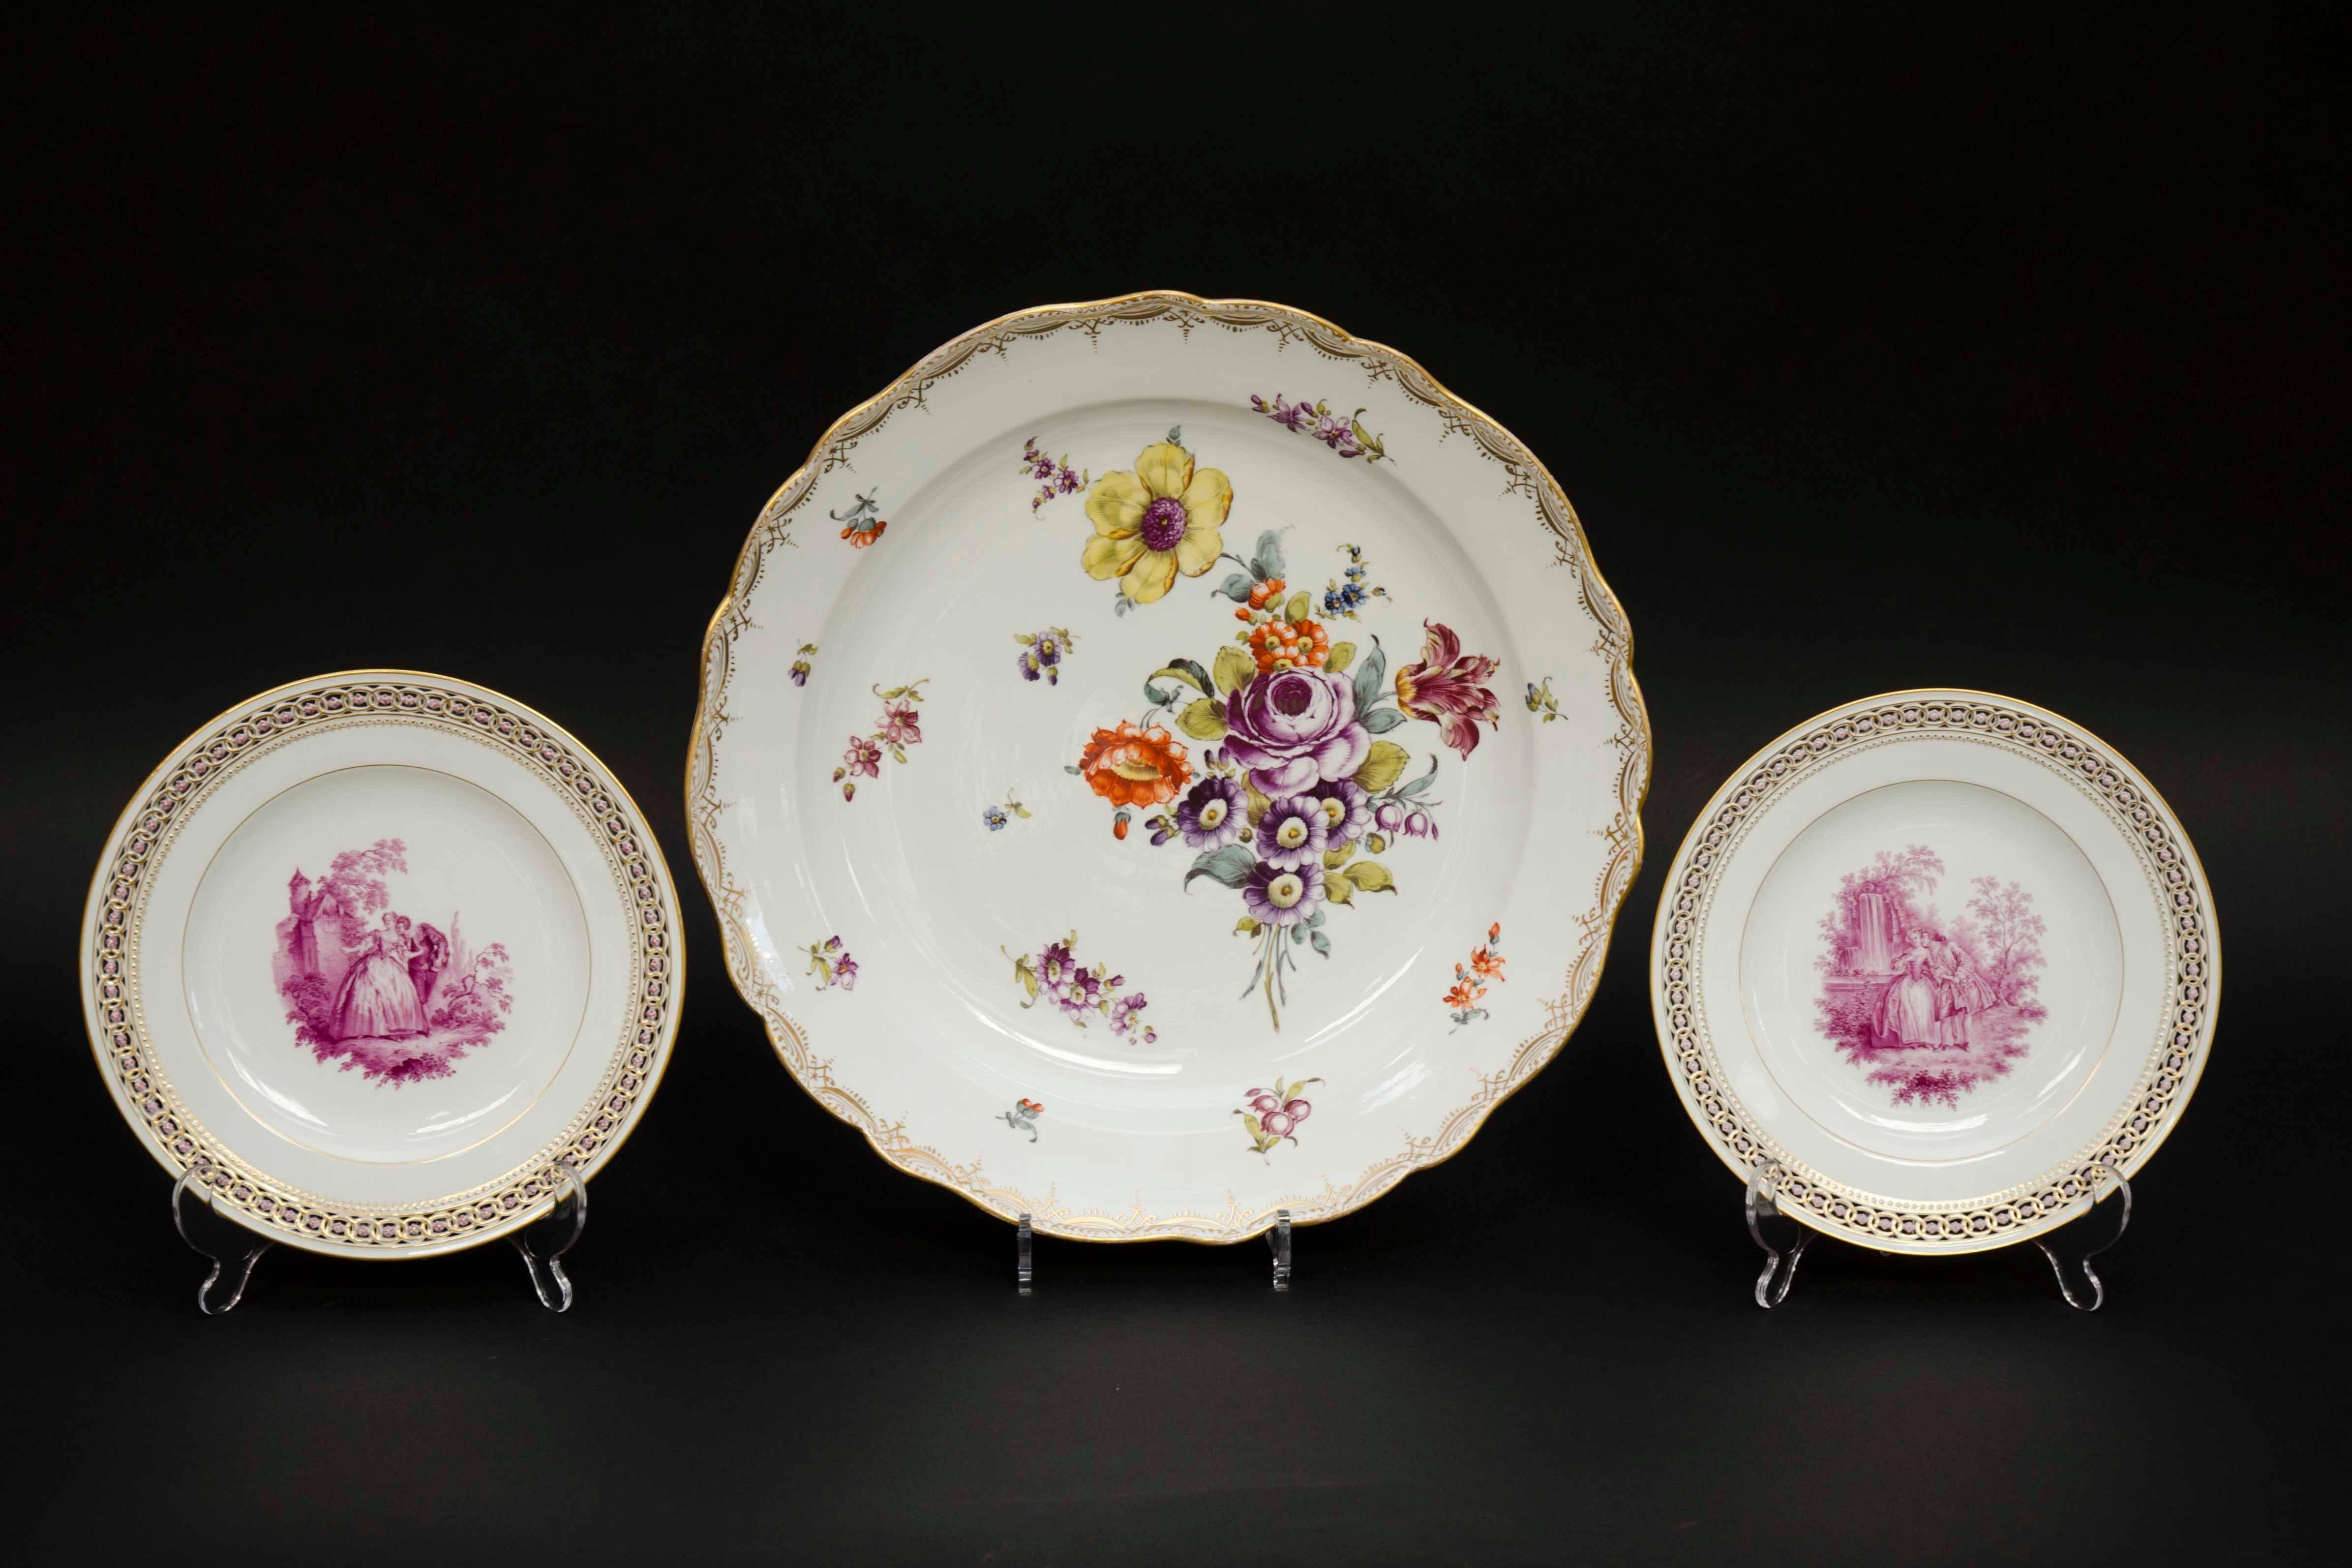 Large 19th Century Meissen Deep Plate with Floral Decoration For Sale 2